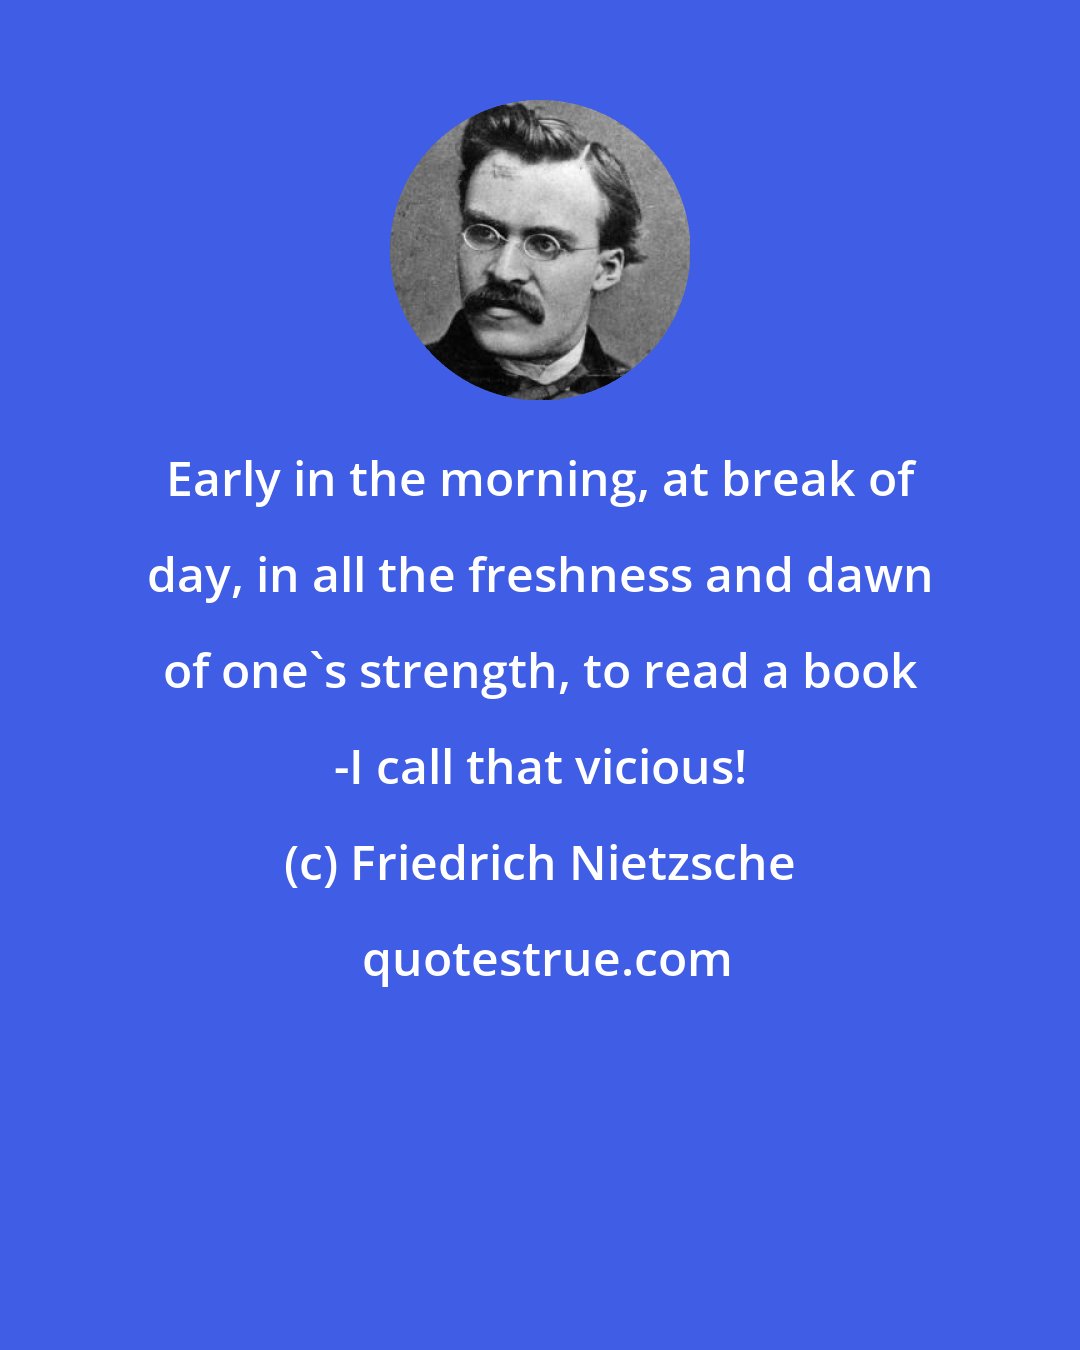 Friedrich Nietzsche: Early in the morning, at break of day, in all the freshness and dawn of one's strength, to read a book -I call that vicious!